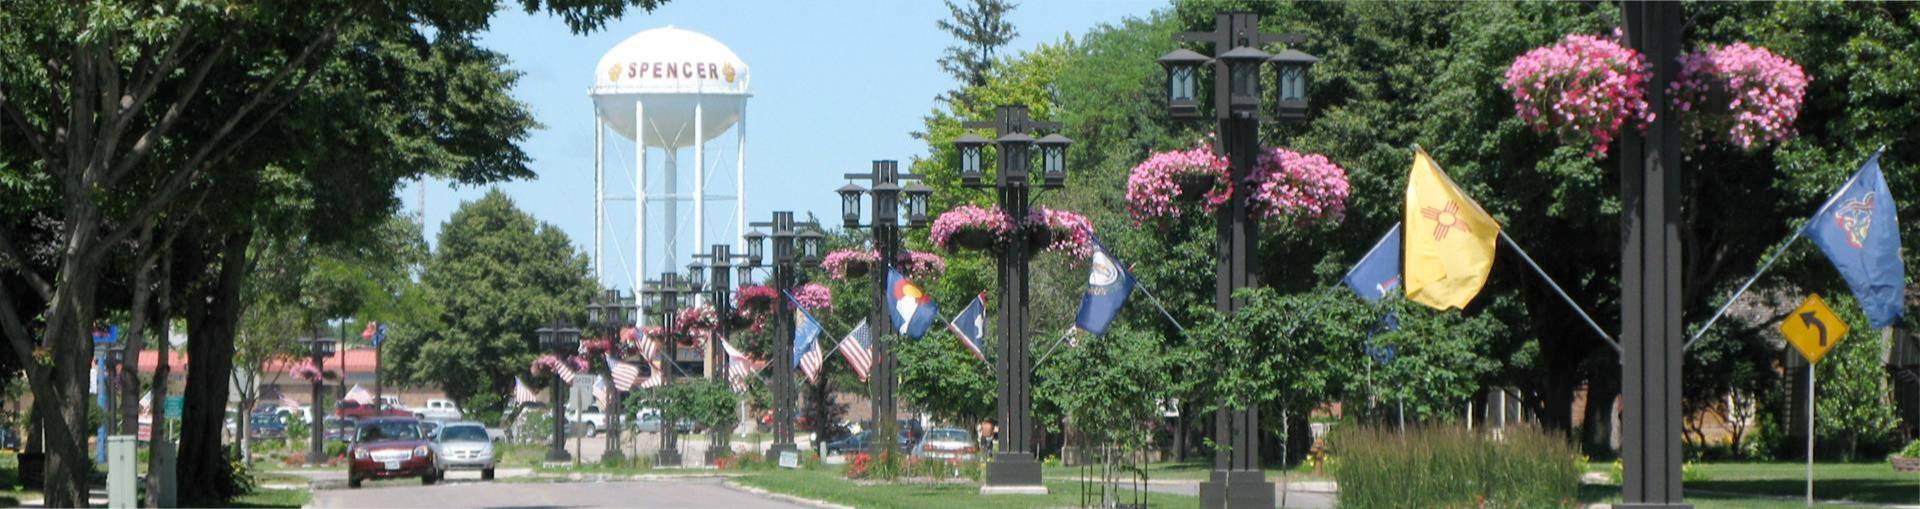 Spencer Is The Best Small Town In Iowa According To The Smithsonian